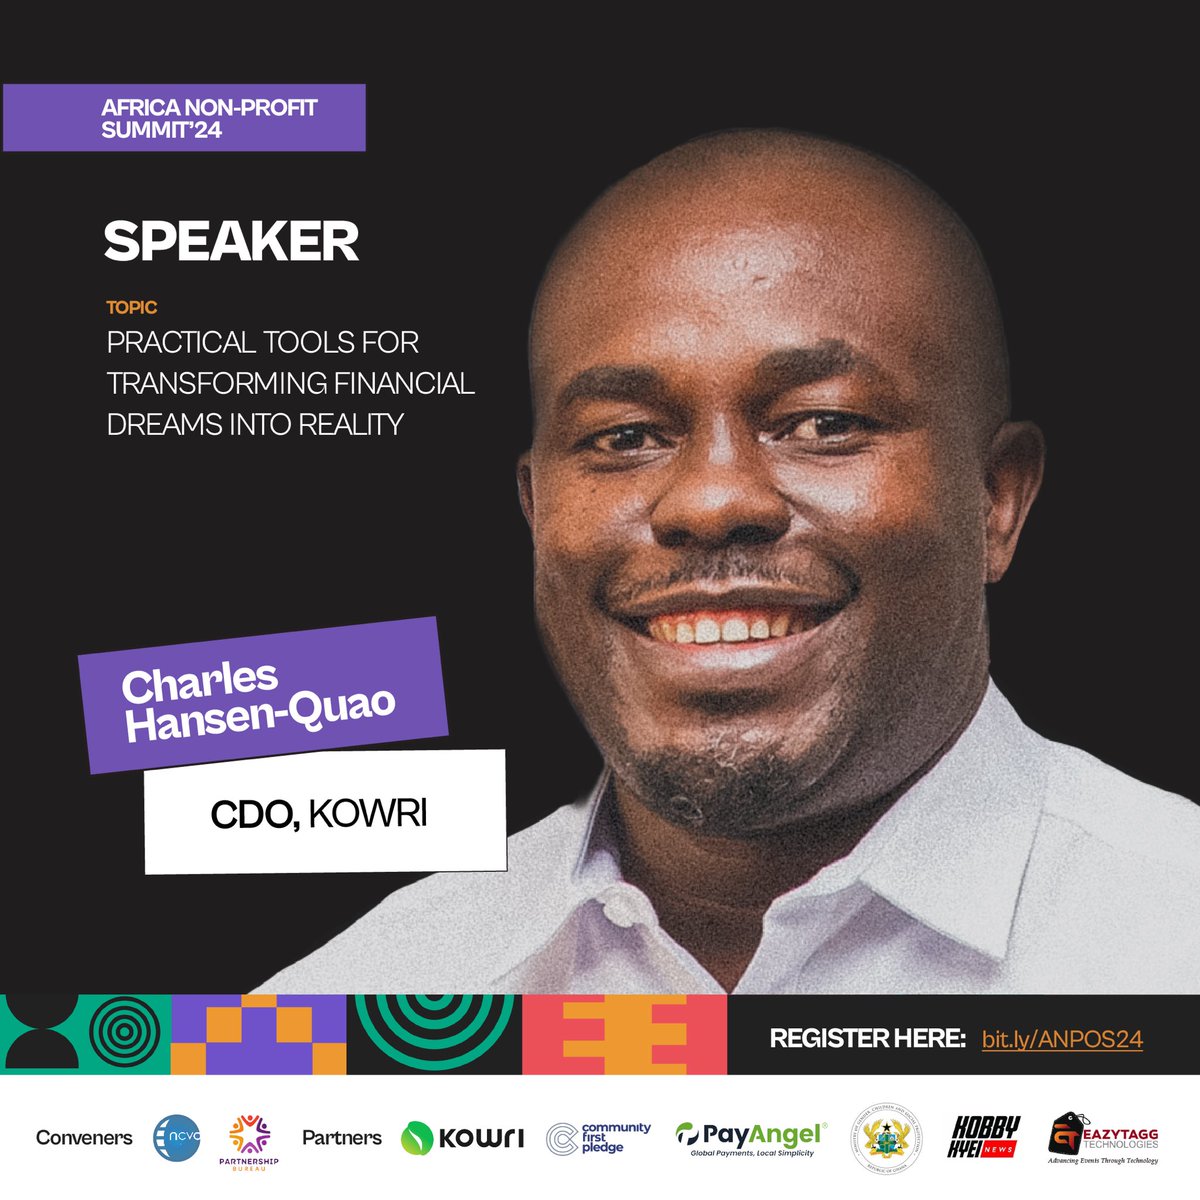 ✨Speaker Announcement - Charles Hansen-Quao.

Charles is an outcomes-oriented senior executive with over 20 years of experience at driving the delivery of transformational digital solutions.

He is the Chief Delivery Officer at SEVN (trading as Kowri).

#ANPOS24